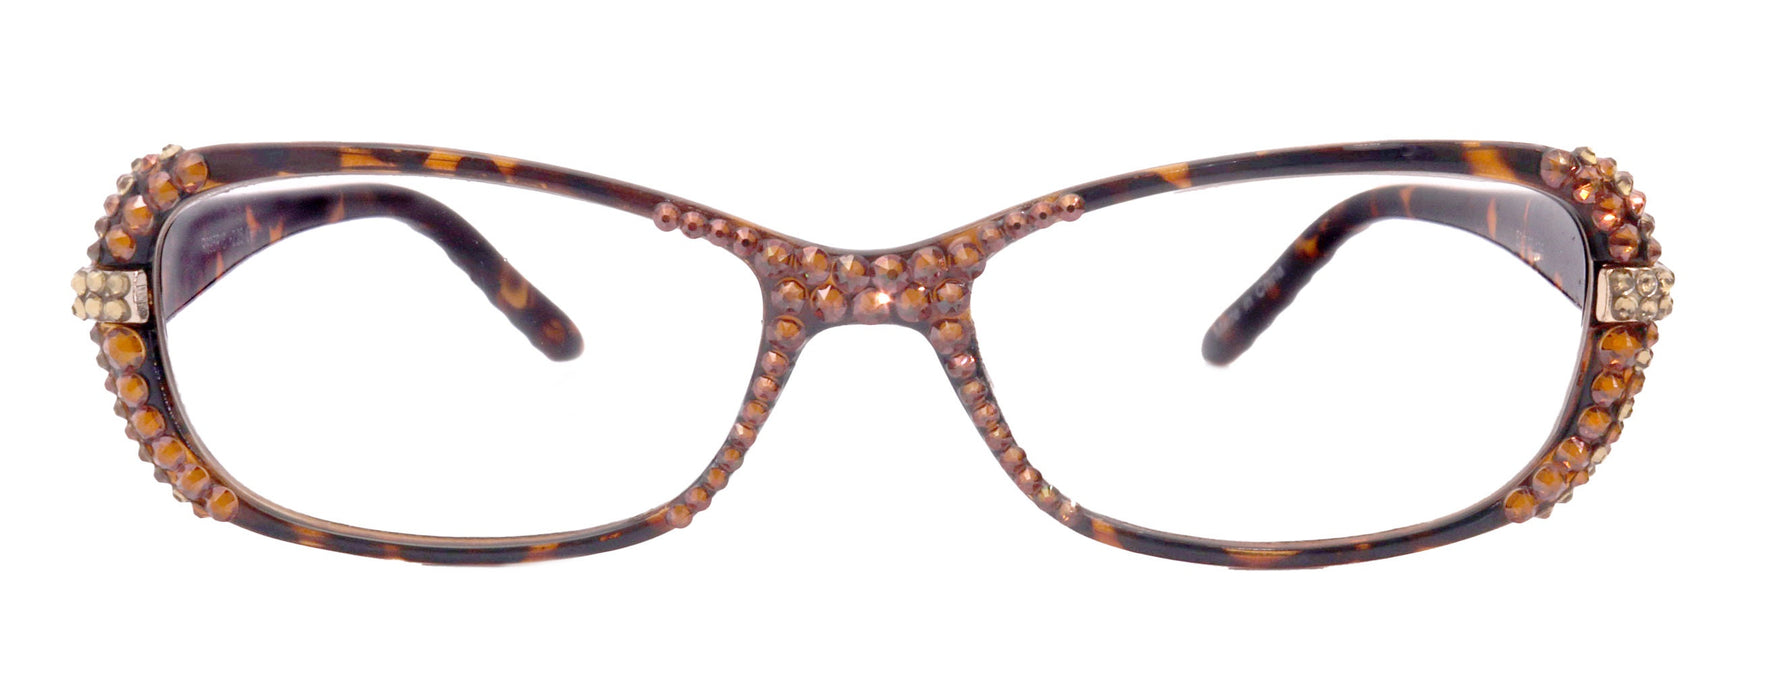 Glamour Quilted, (Bling) Women Reading Glasses W (Front, Sides) (Light Colorado, copper ) Genuine European Crystals NY Fifth Avenue